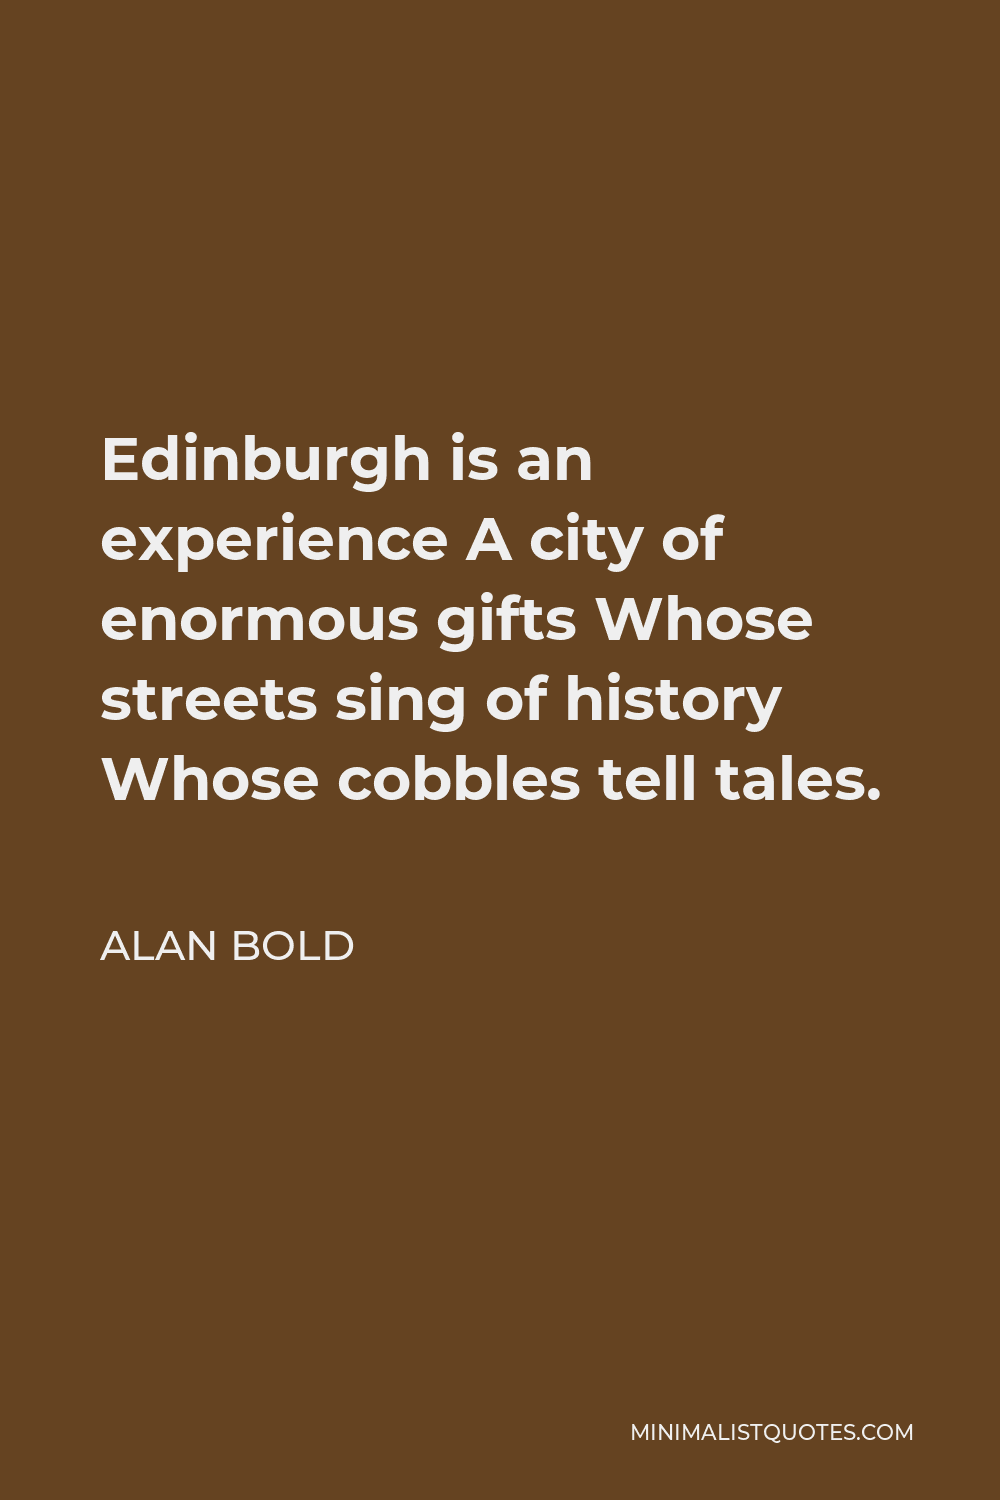 Alan Bold Quote - Edinburgh is an experience A city of enormous gifts Whose streets sing of history Whose cobbles tell tales.